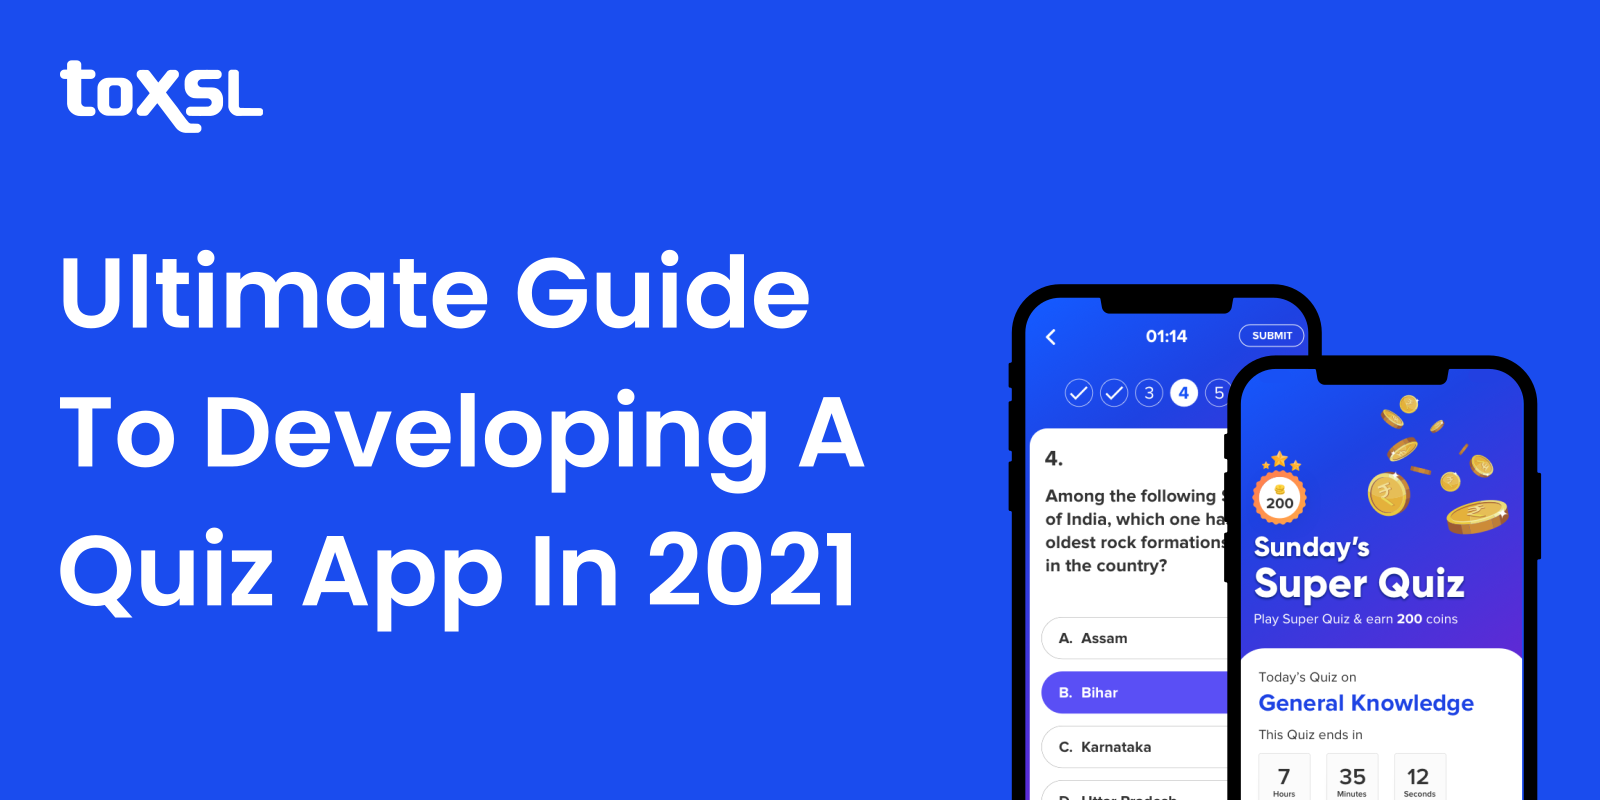 Ultimate Guide To Developing A Quiz App in 2021